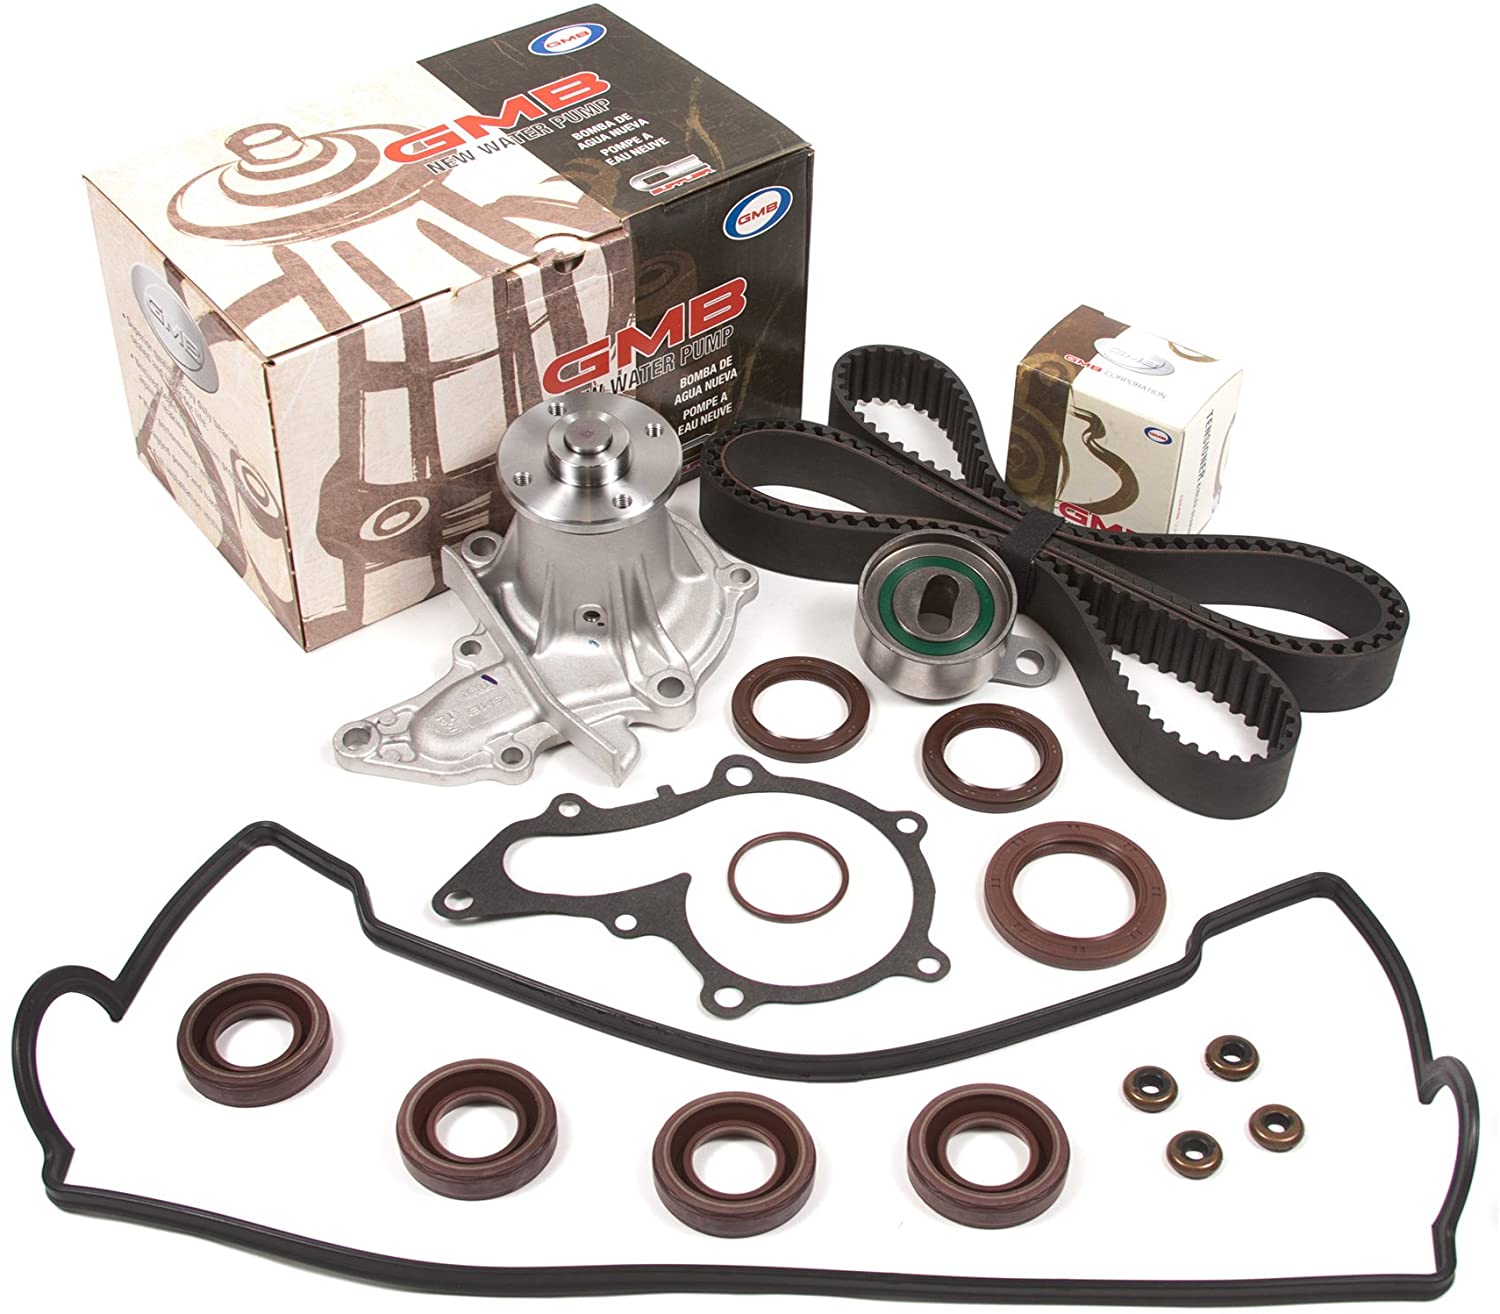 Evergreen TBK236VC Compatible With 93-97 Toyota Corolla Geo Prizm 4AFE 1.6L Timing Belt Kit Valve Cover Gasket GMB Water Pump